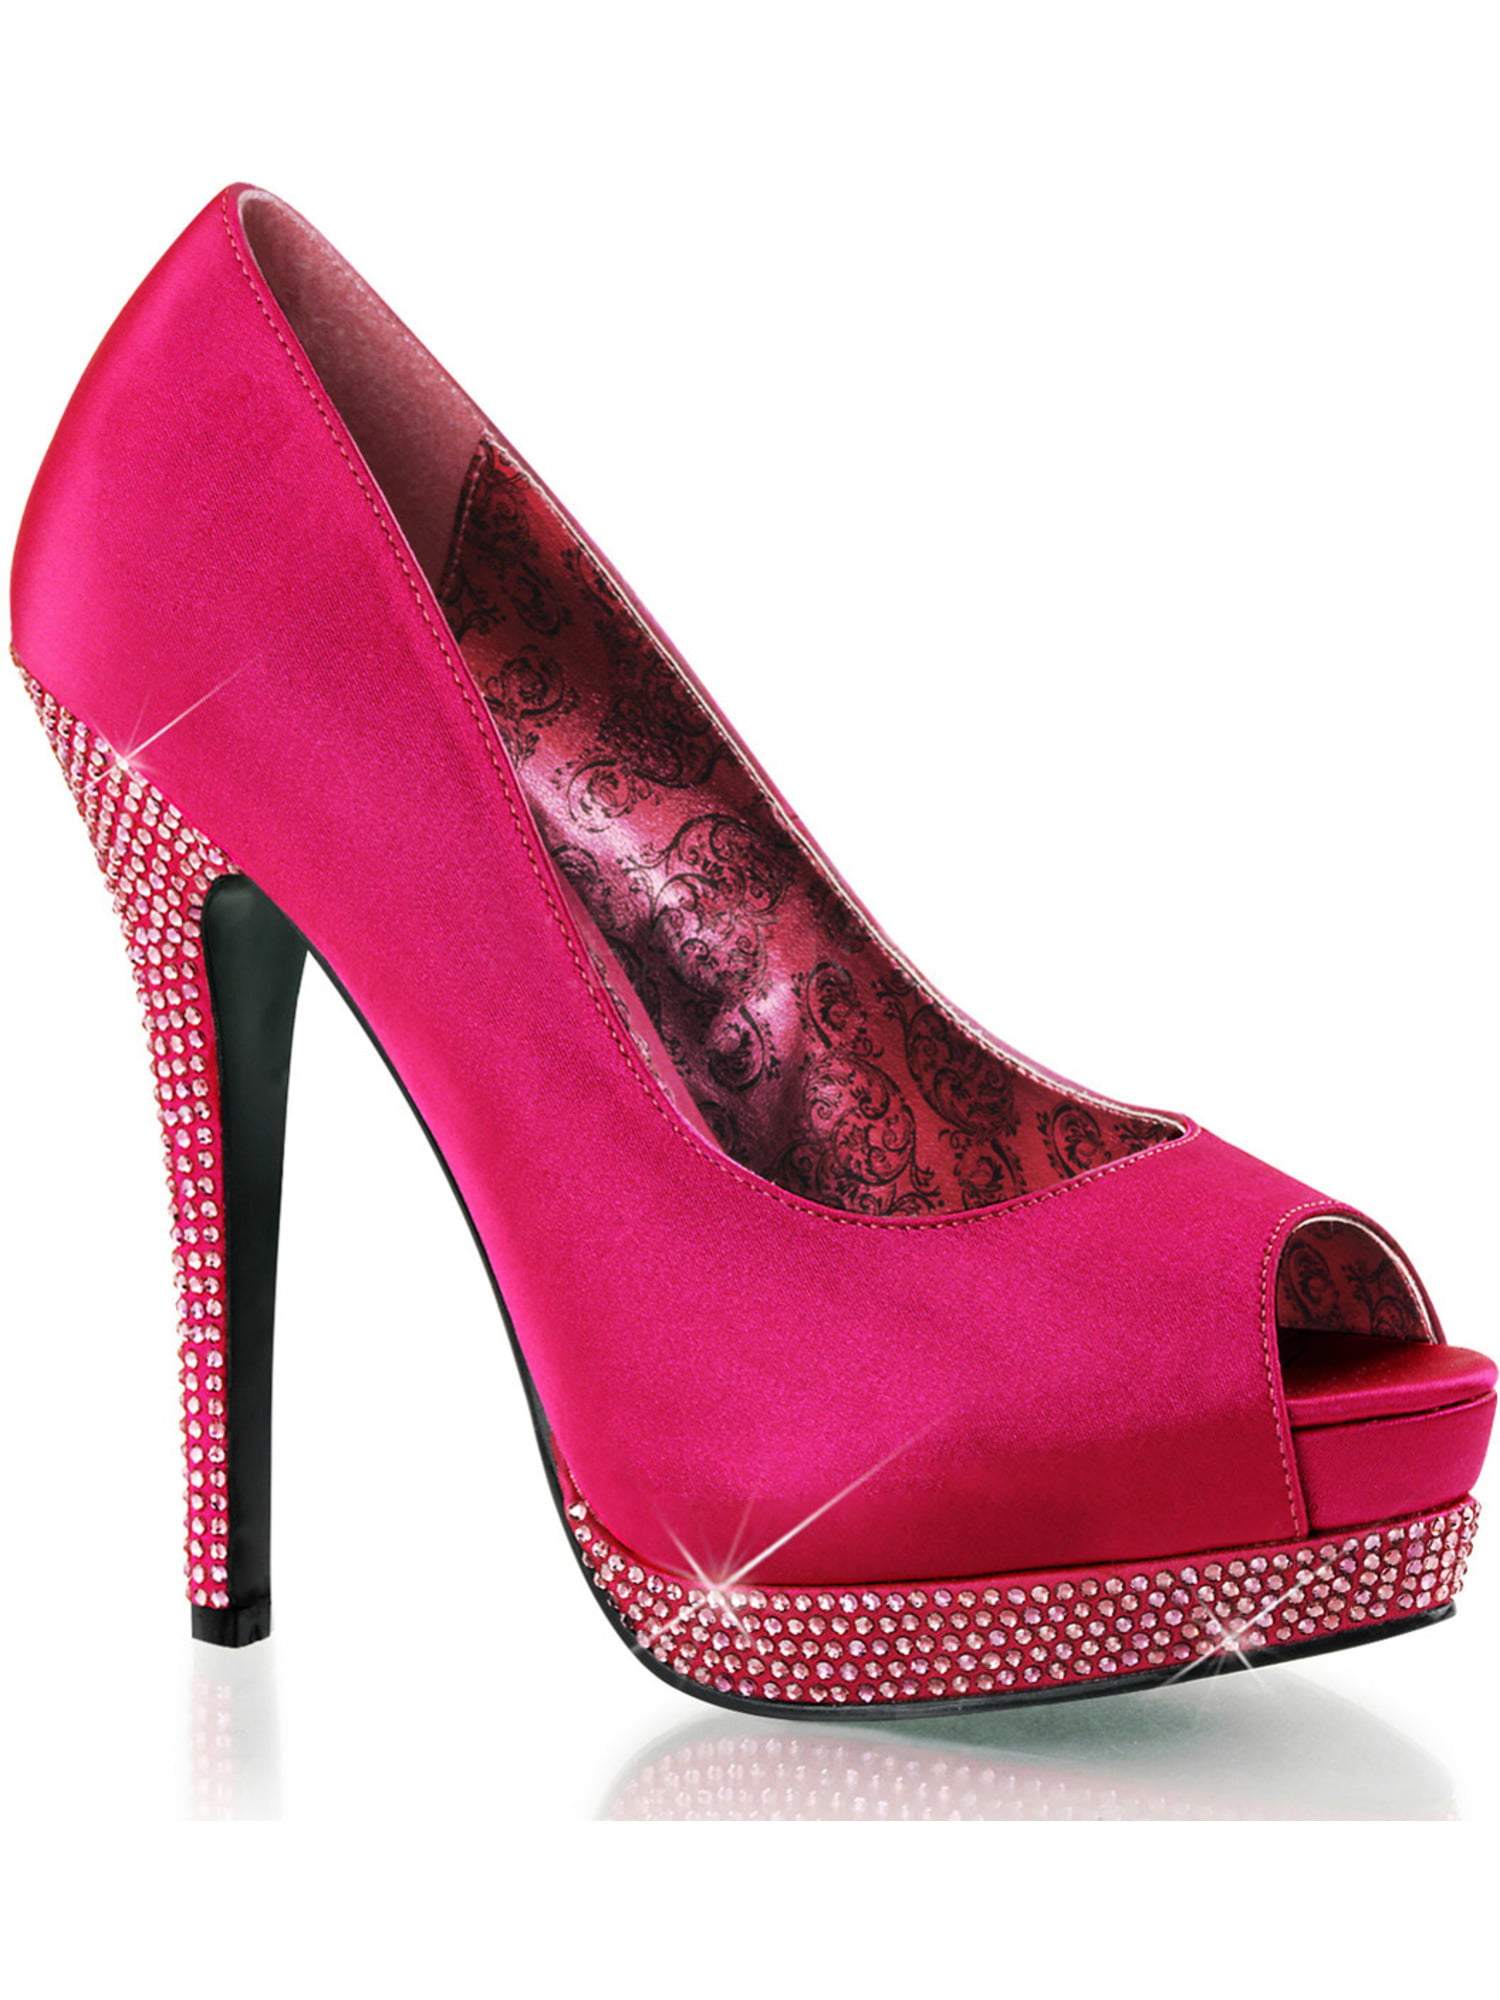 Buy > shoes for hot pink dress > in stock